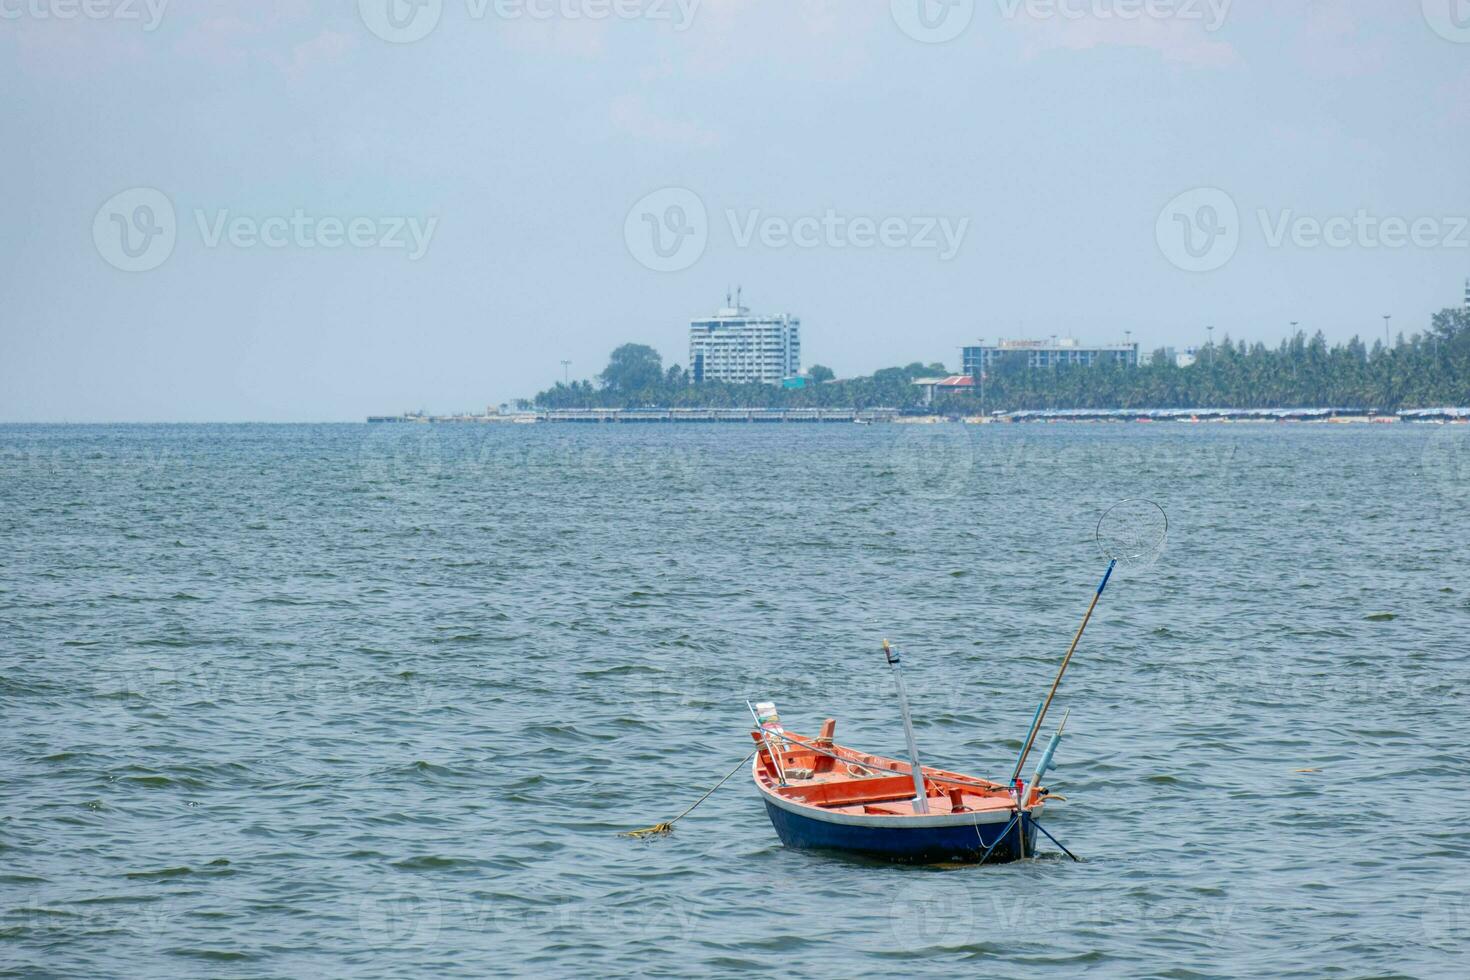 Fishing boats used to catch fish Located on sea water with slight waves. Used to find food for people who earn a living catching fish. For those who live next to the sea photo